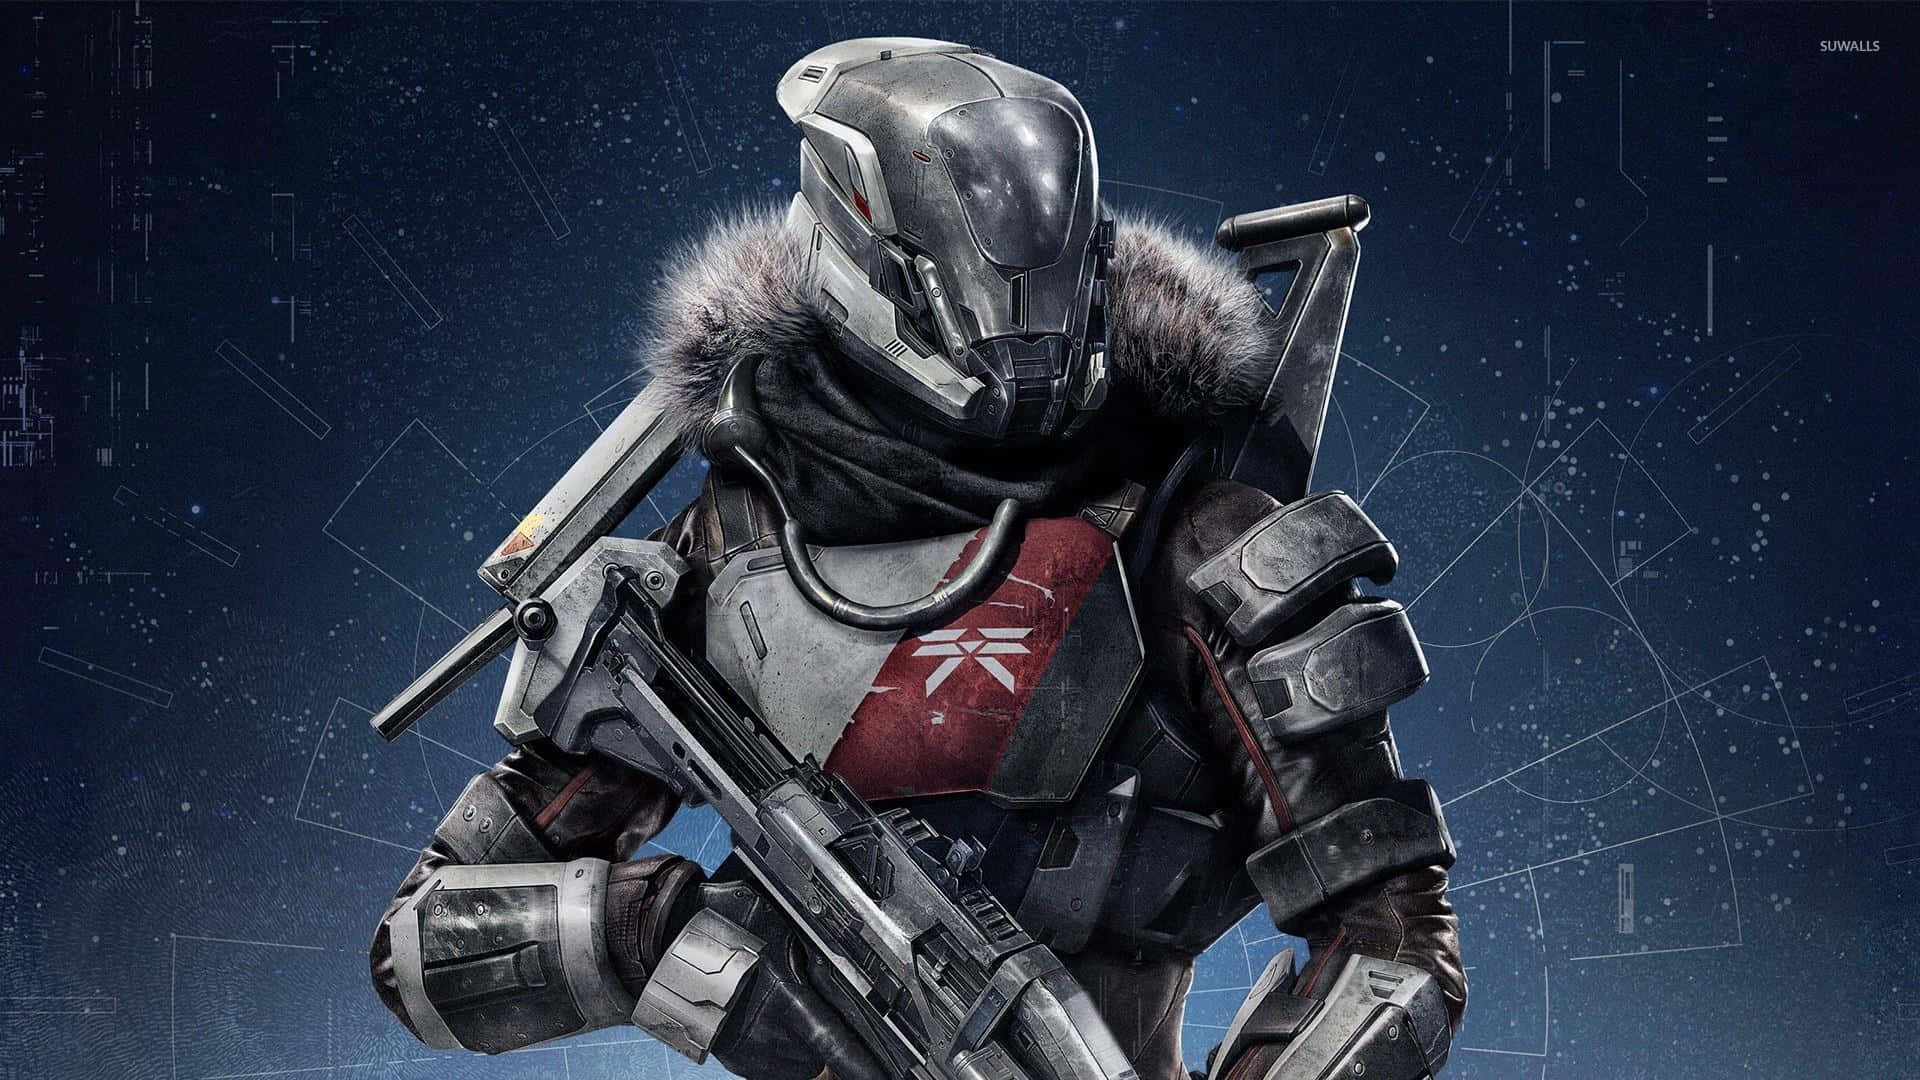 The Ultimate Player Experience: Titan character in Destiny 2 4K Wallpaper